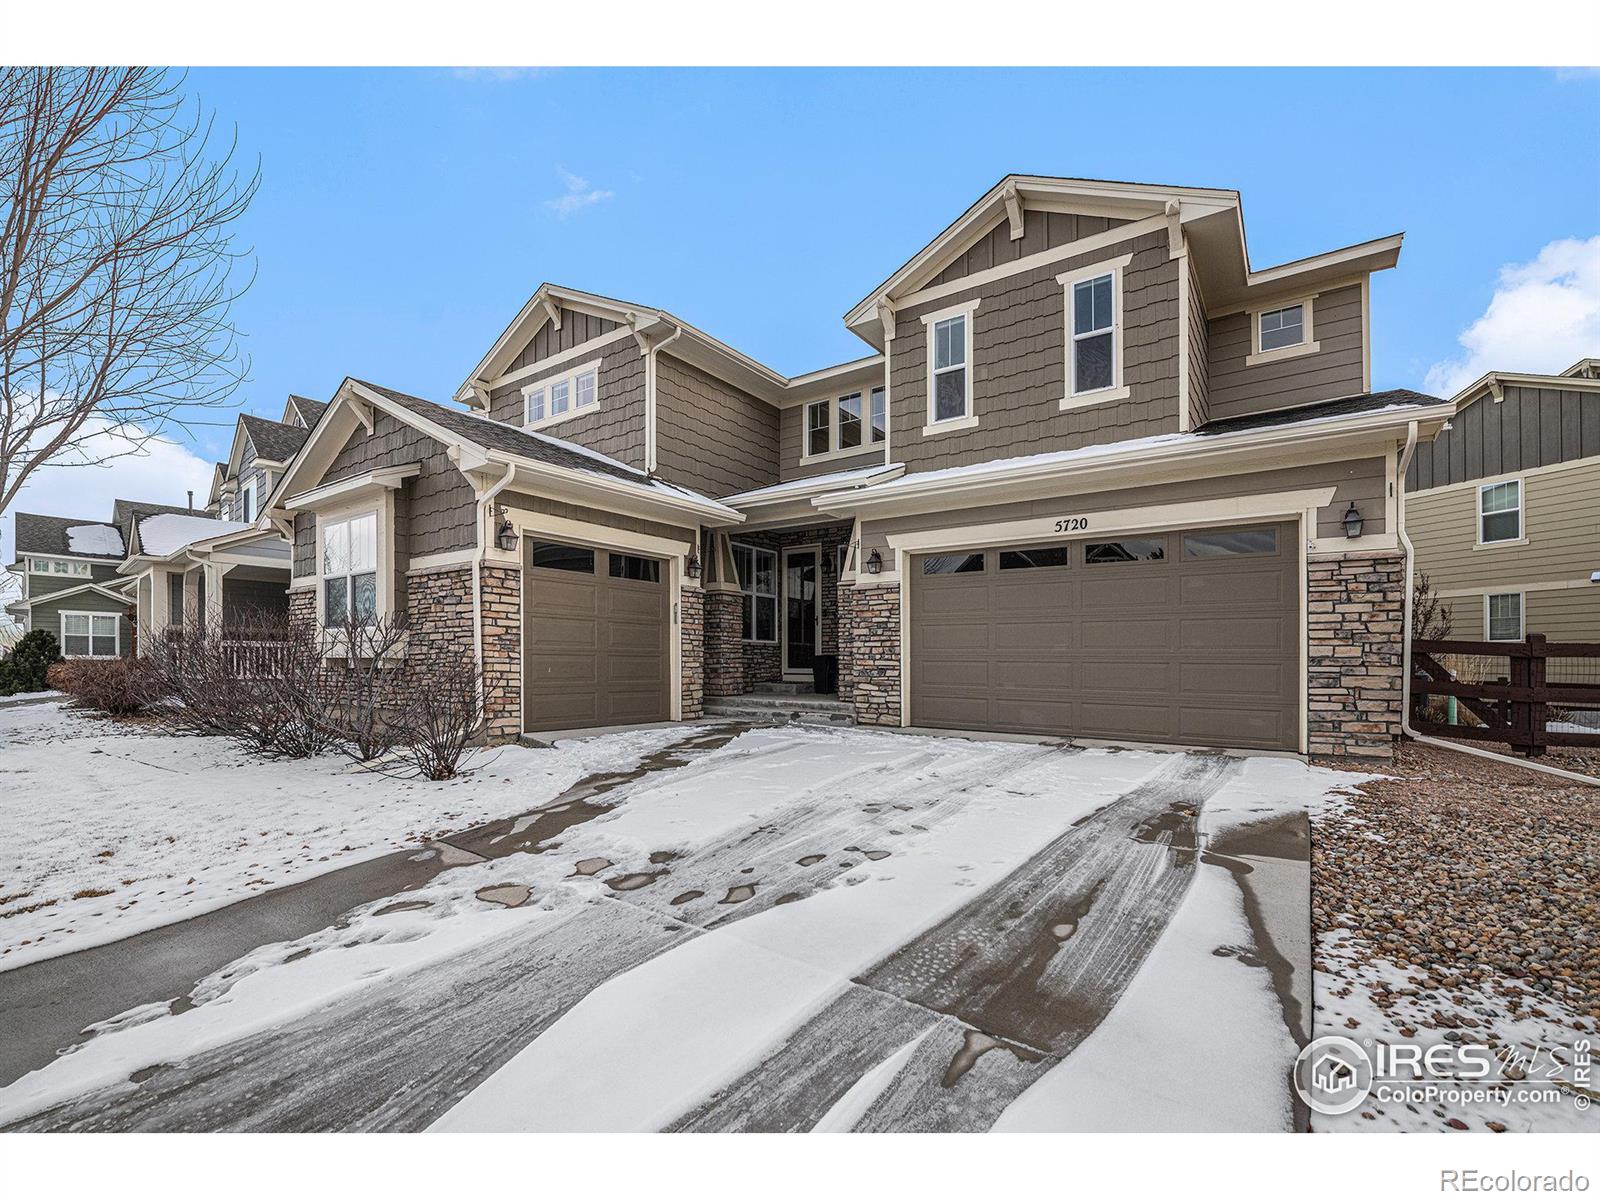 Report Image for 5720  Crossview Drive,Fort Collins, Colorado